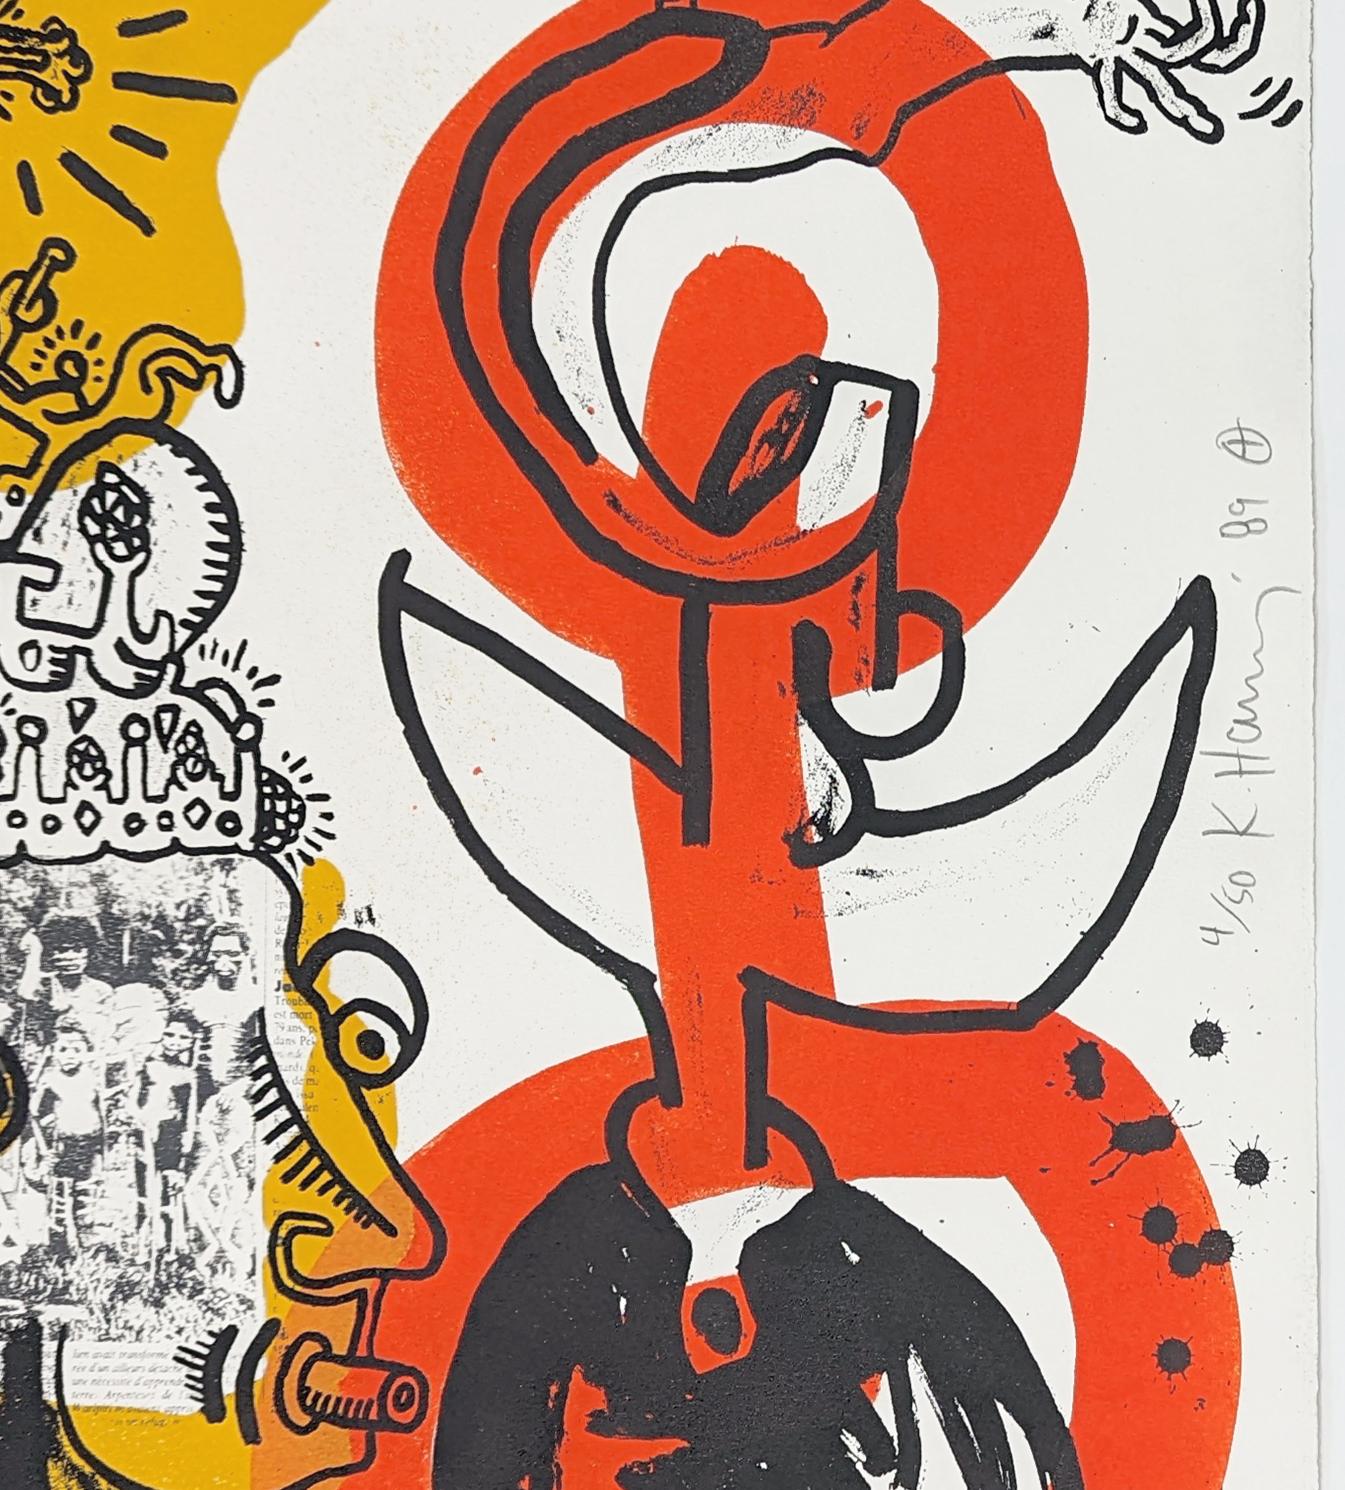 THE KING - Print by Keith Haring